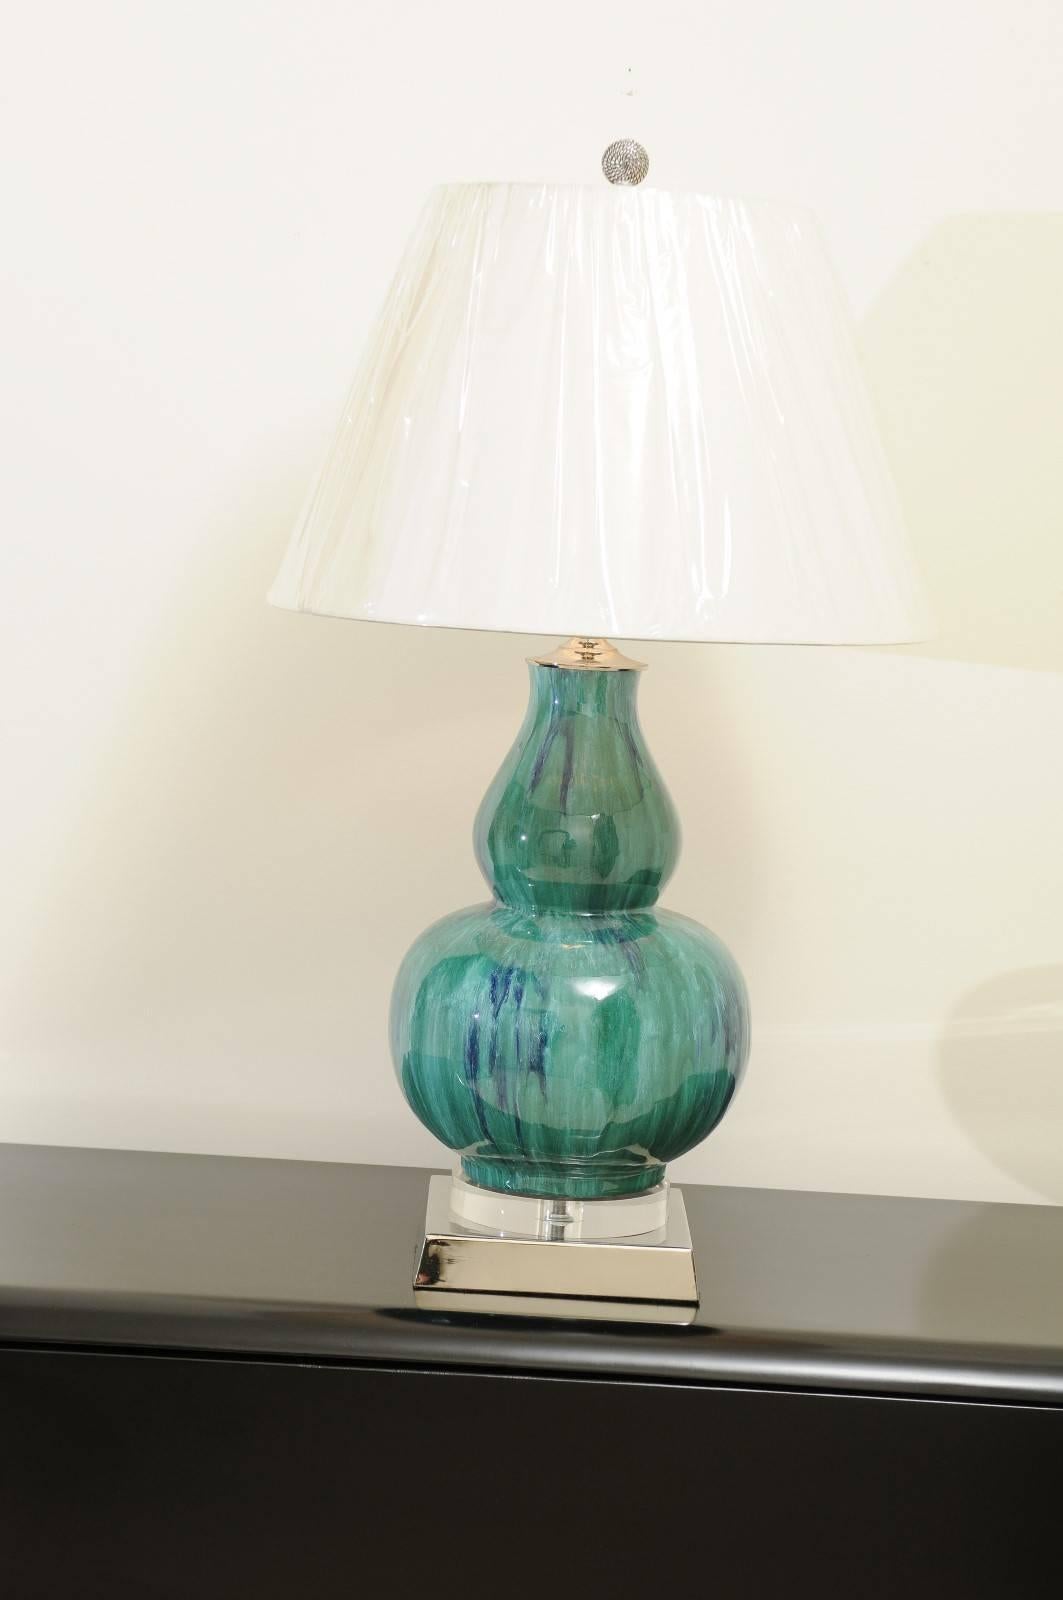 A stunning pair of drip glaze ceramic vessels as custom made lamps. Beautiful form with fabulous highlights of Turquoise, Teal and Cobalt. Accents in polished Nickel and Lucite. Expertly crafted using components of only the finest quality. Exquisite